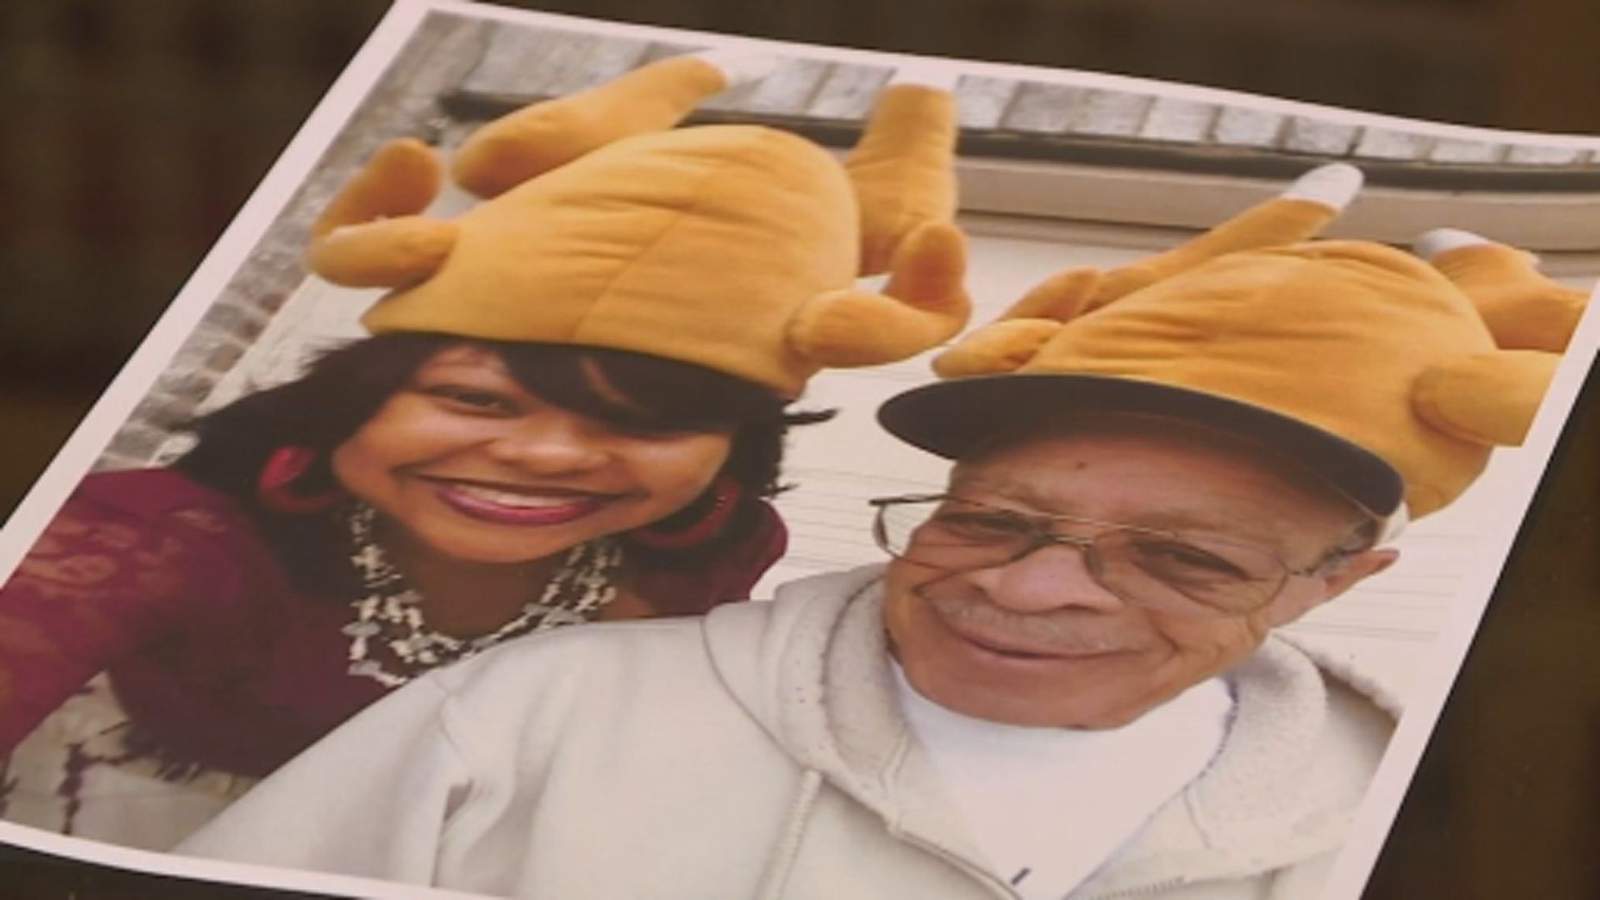 Family of 83-year-old man who died during winter storm files wrongful death lawsuit against CenterPoint Energy